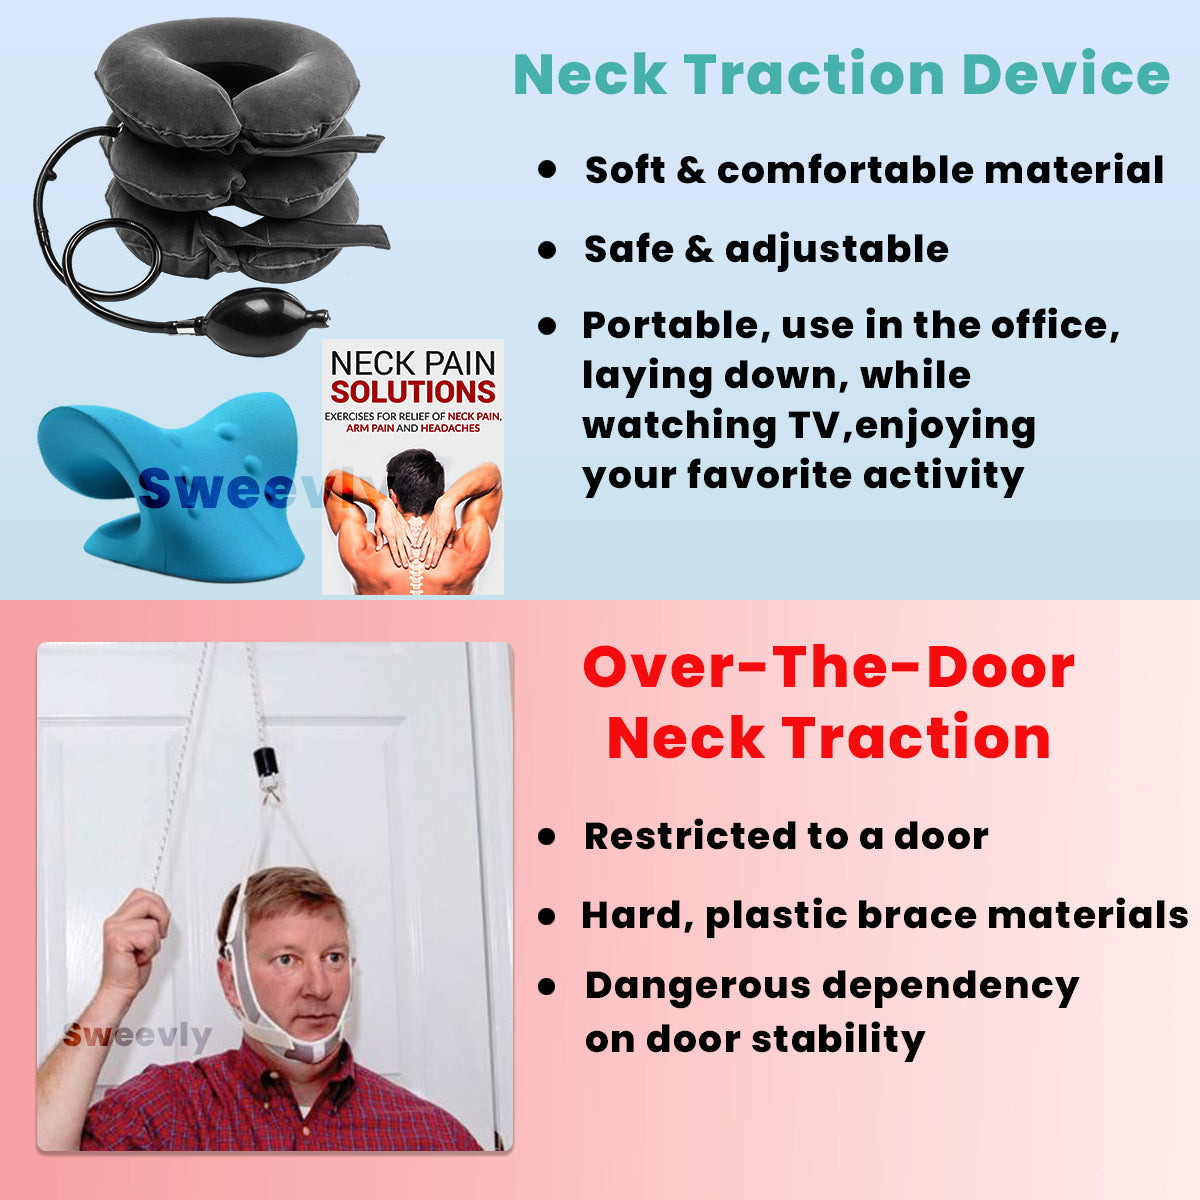 Sweevly Neck Traction